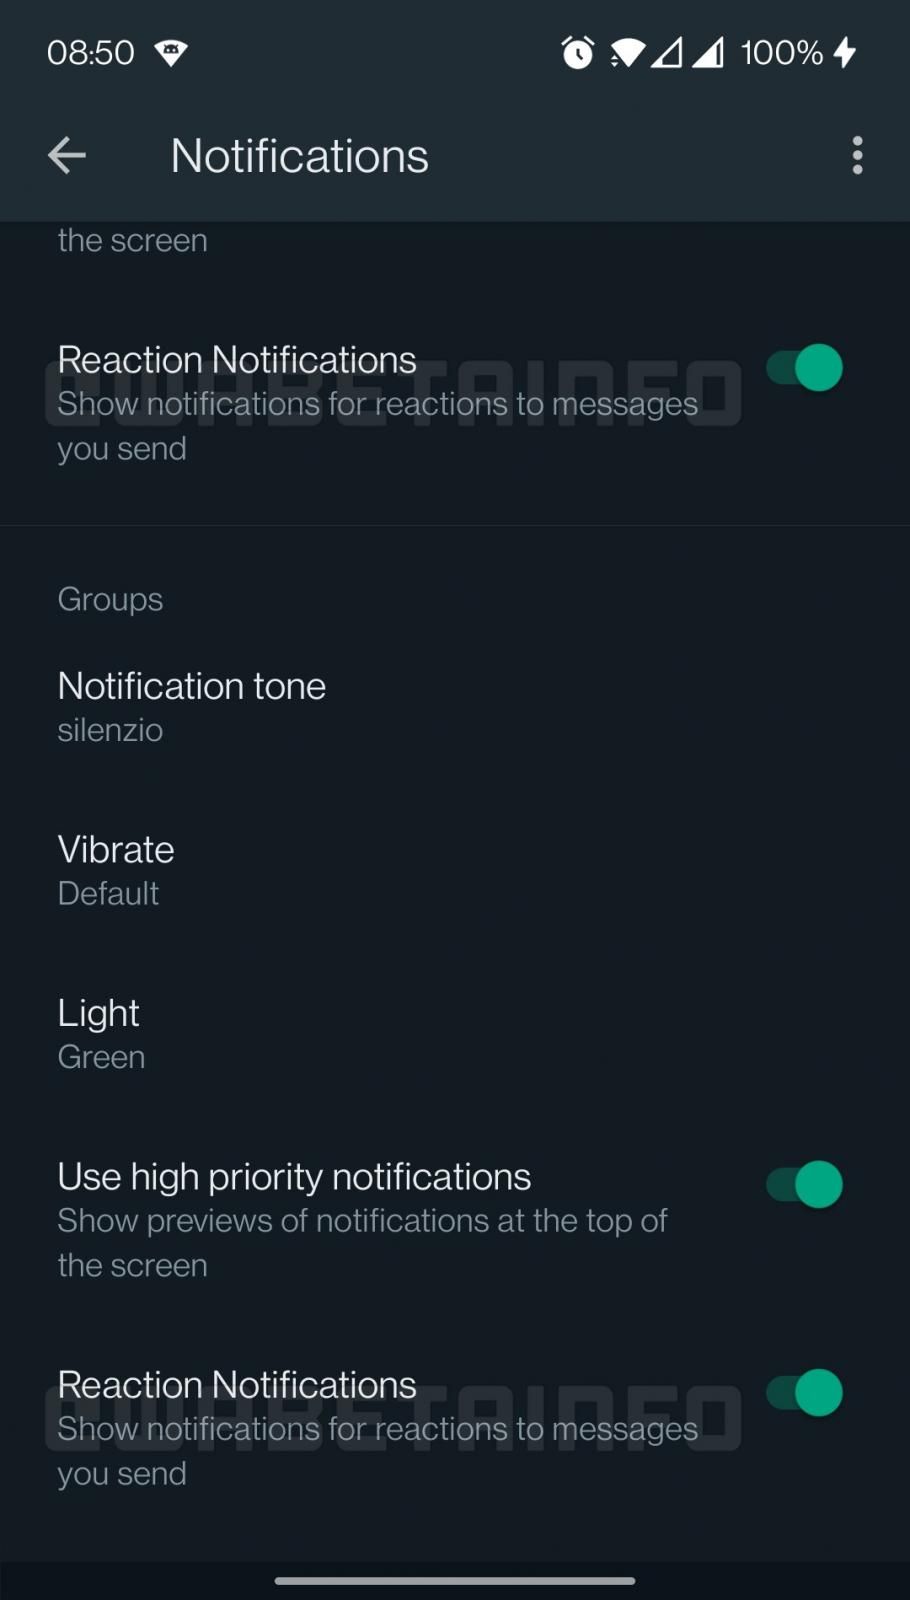 whatsapp message reaction notifications setting on Android